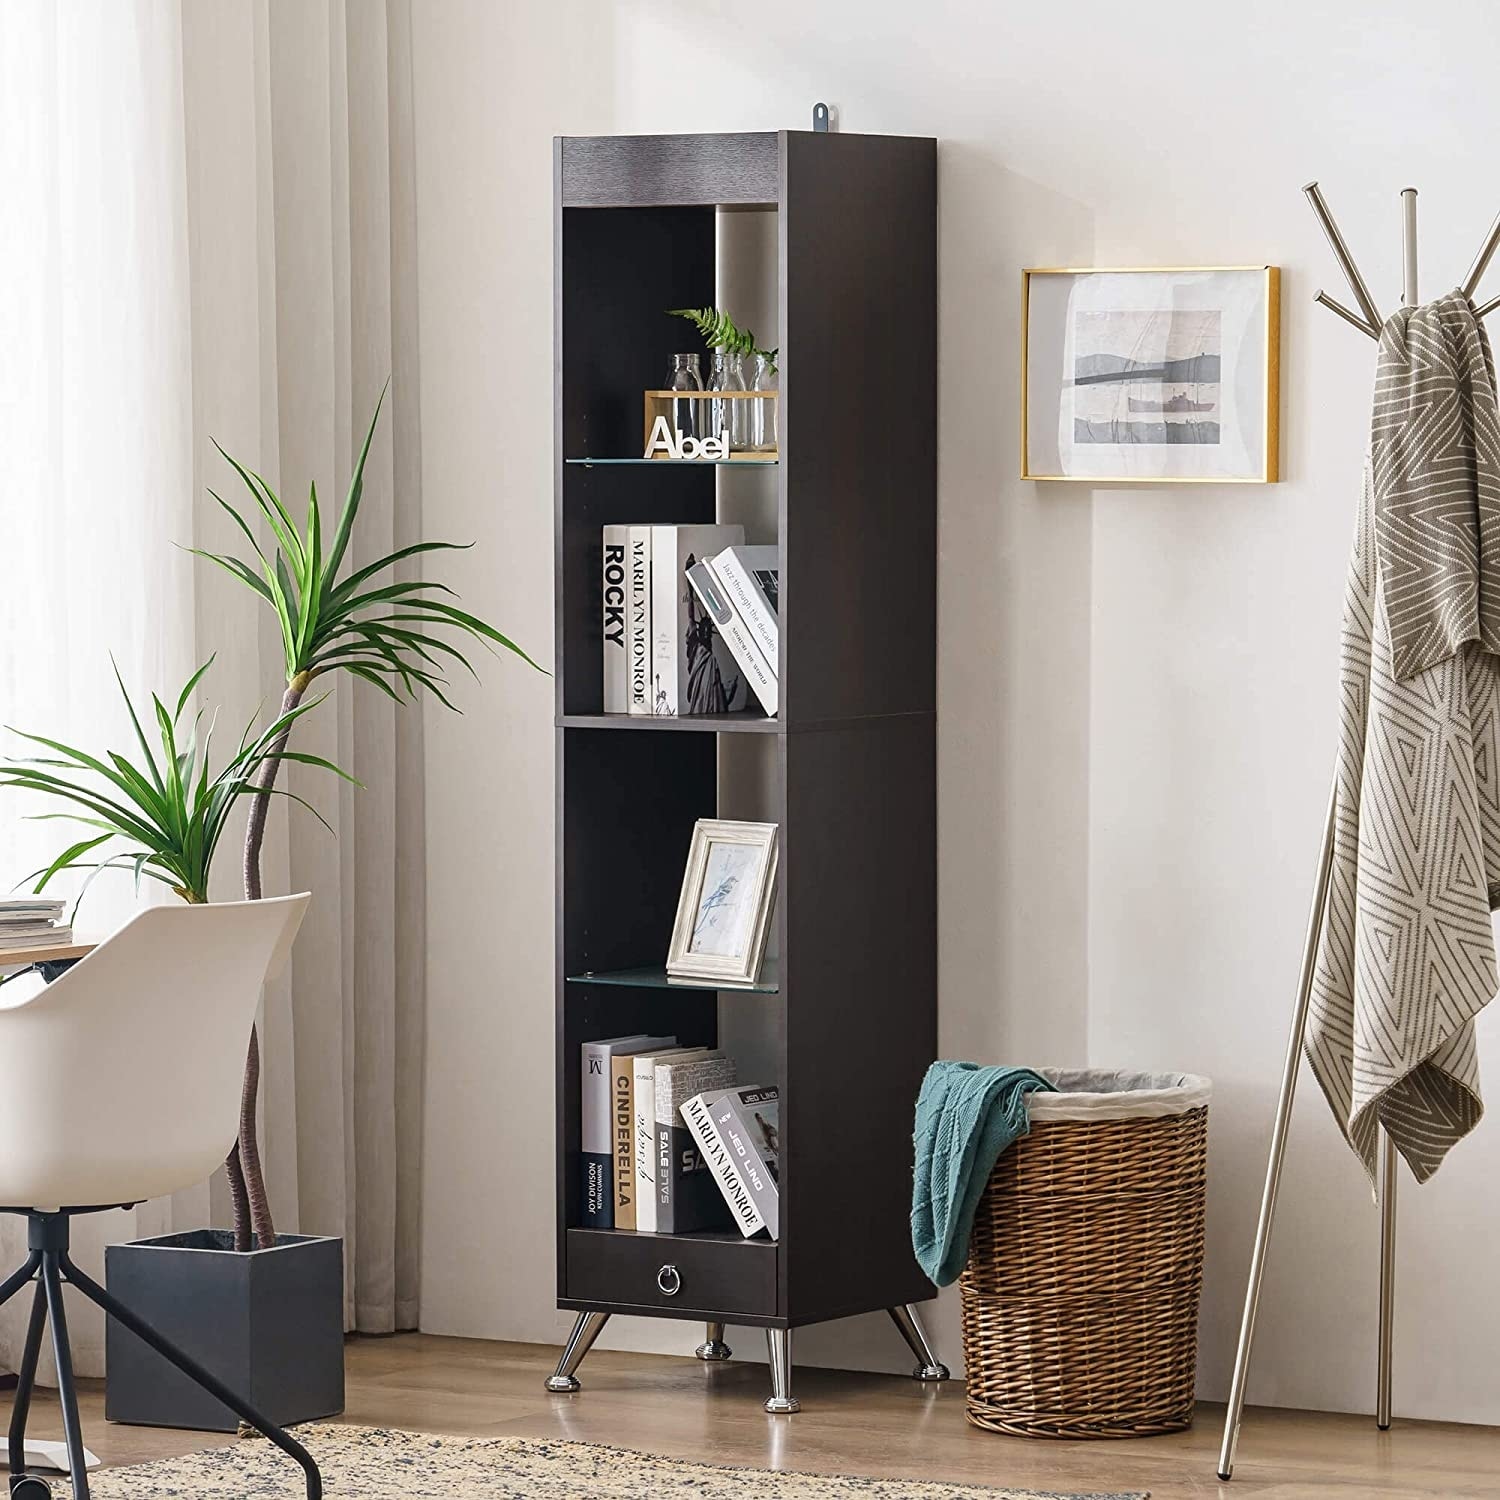 https://ak1.ostkcdn.com/images/products/is/images/direct/2fbdb80262d44b8e5d6e46b2d6e4ea9fda70cdf4/Ivinta-Tall-Bookshelf-for-Small-Spaces%2C-Narrow-Bookcase-with-Adjustable-Glass-Display-Shelf.jpg